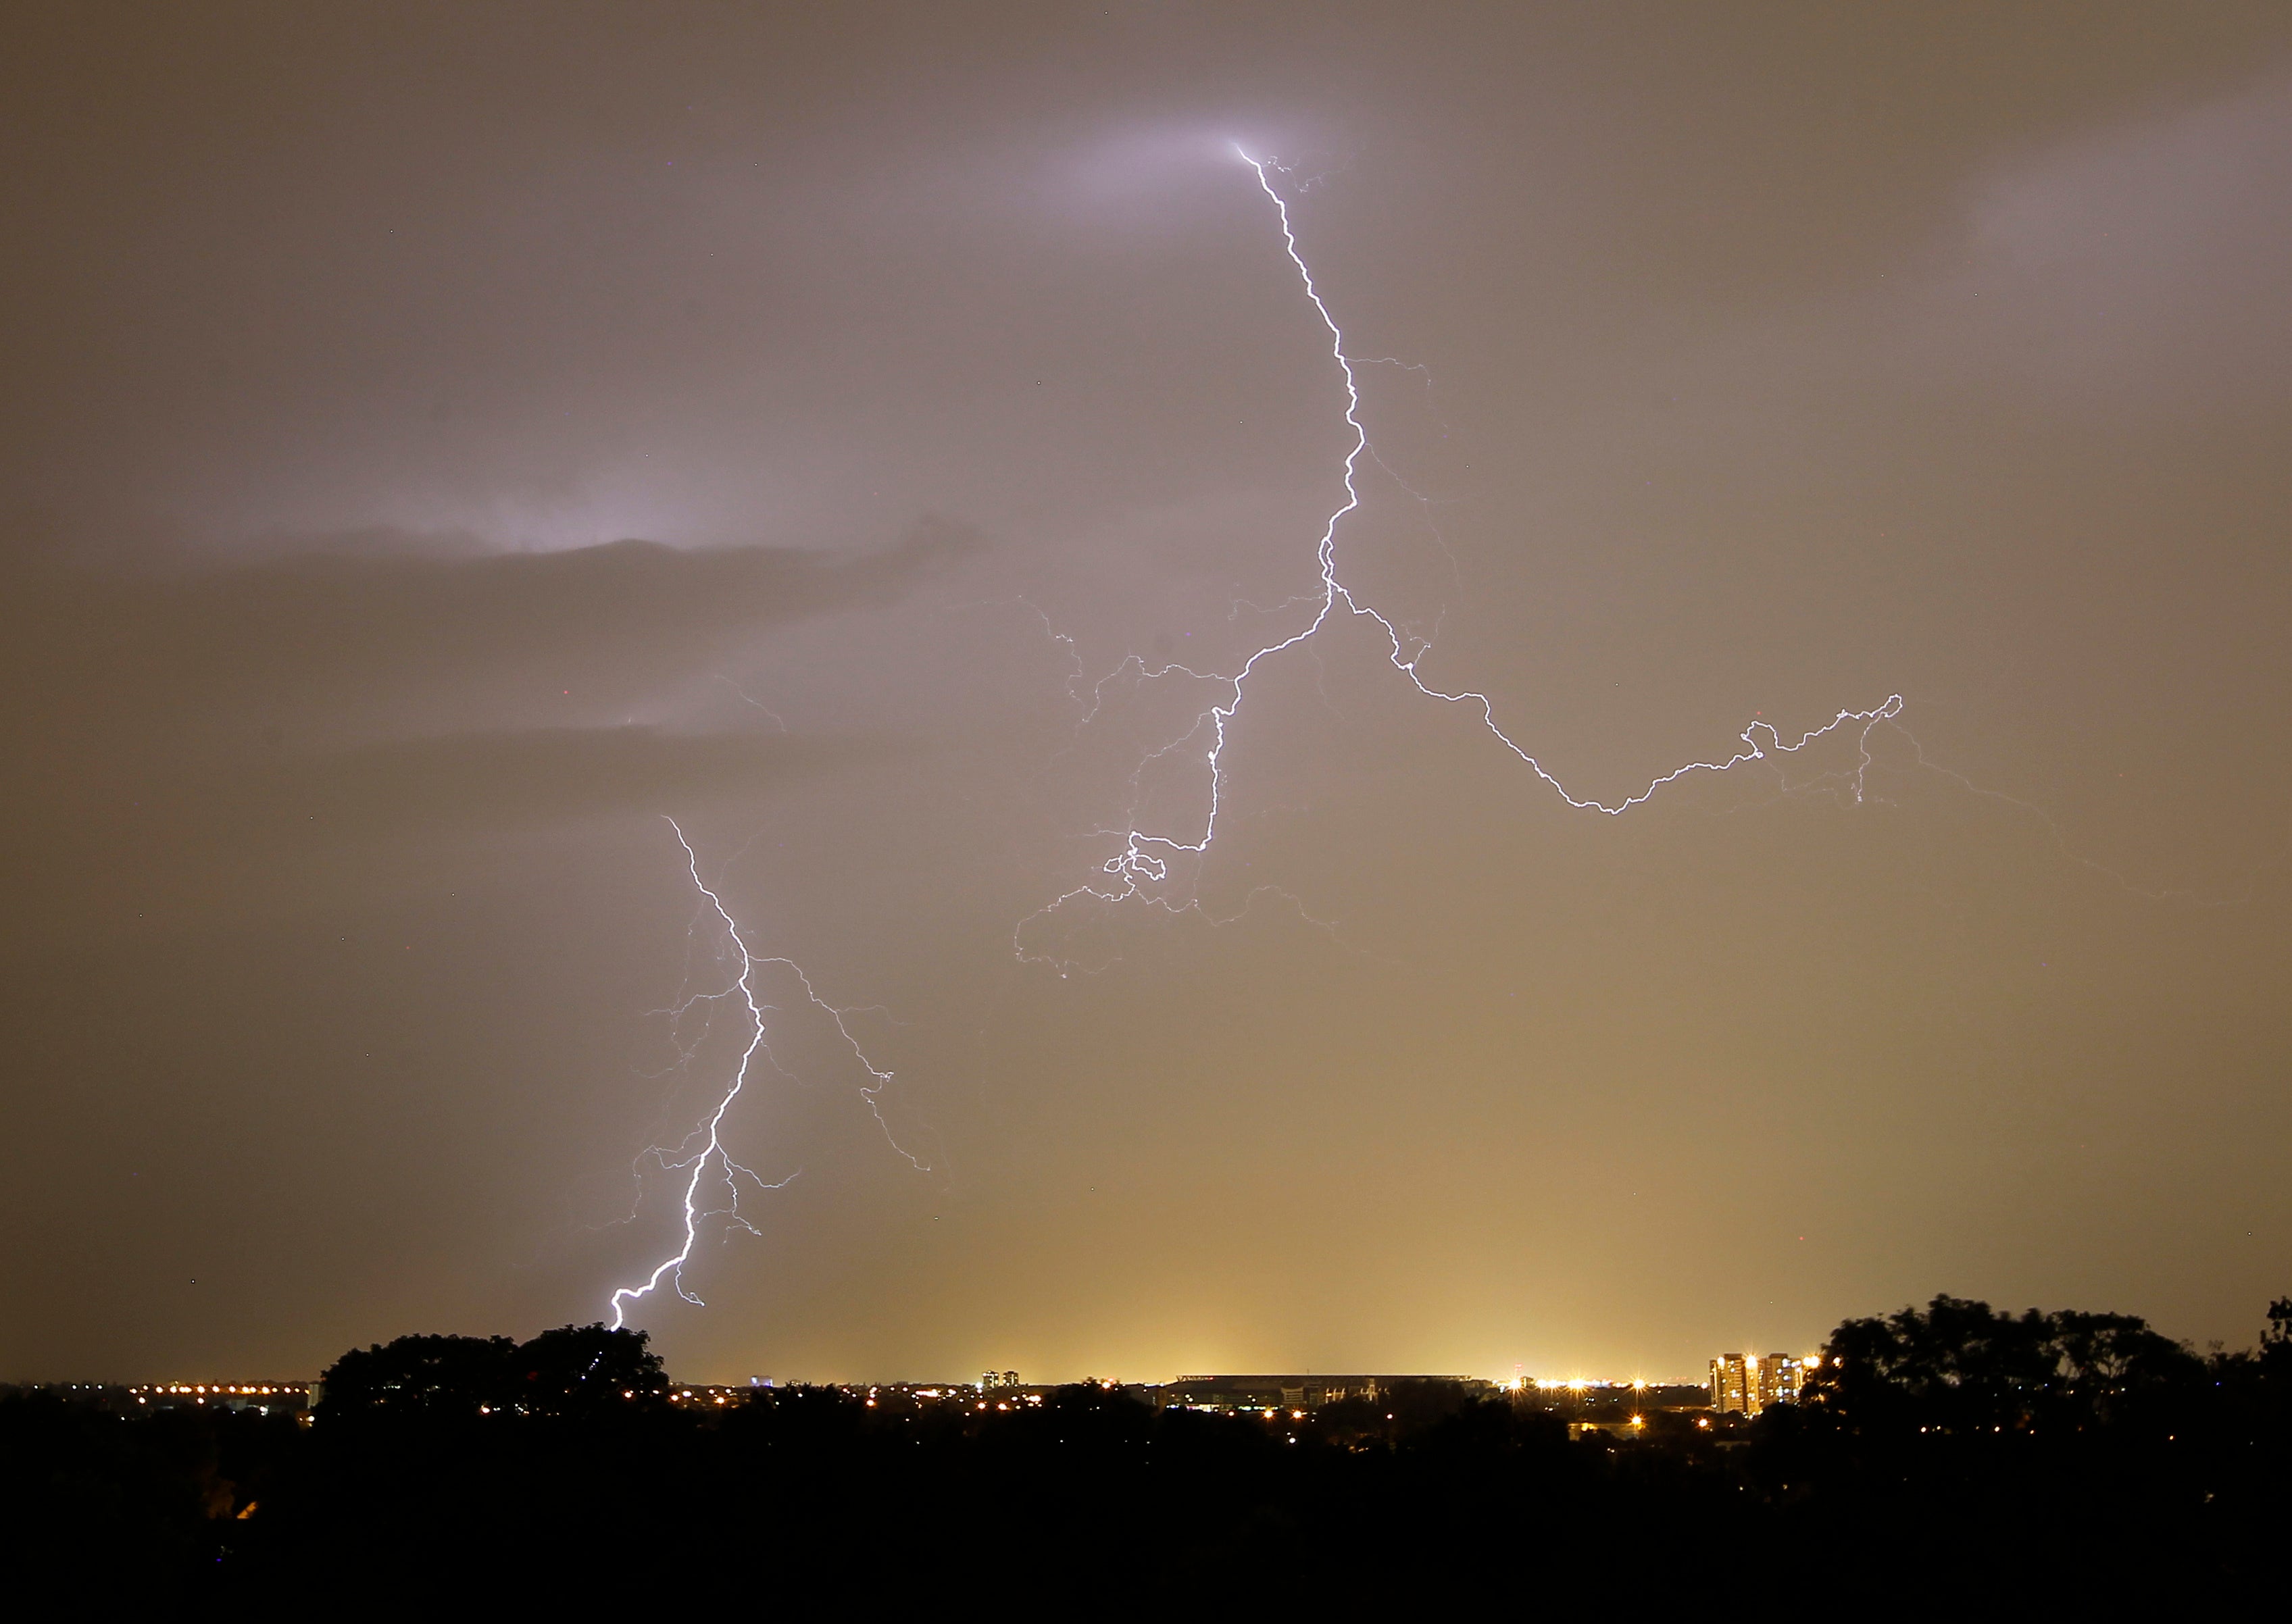 More than 36,000 lightning strikes were recorded across the UK in just 12 hours on Sunday night